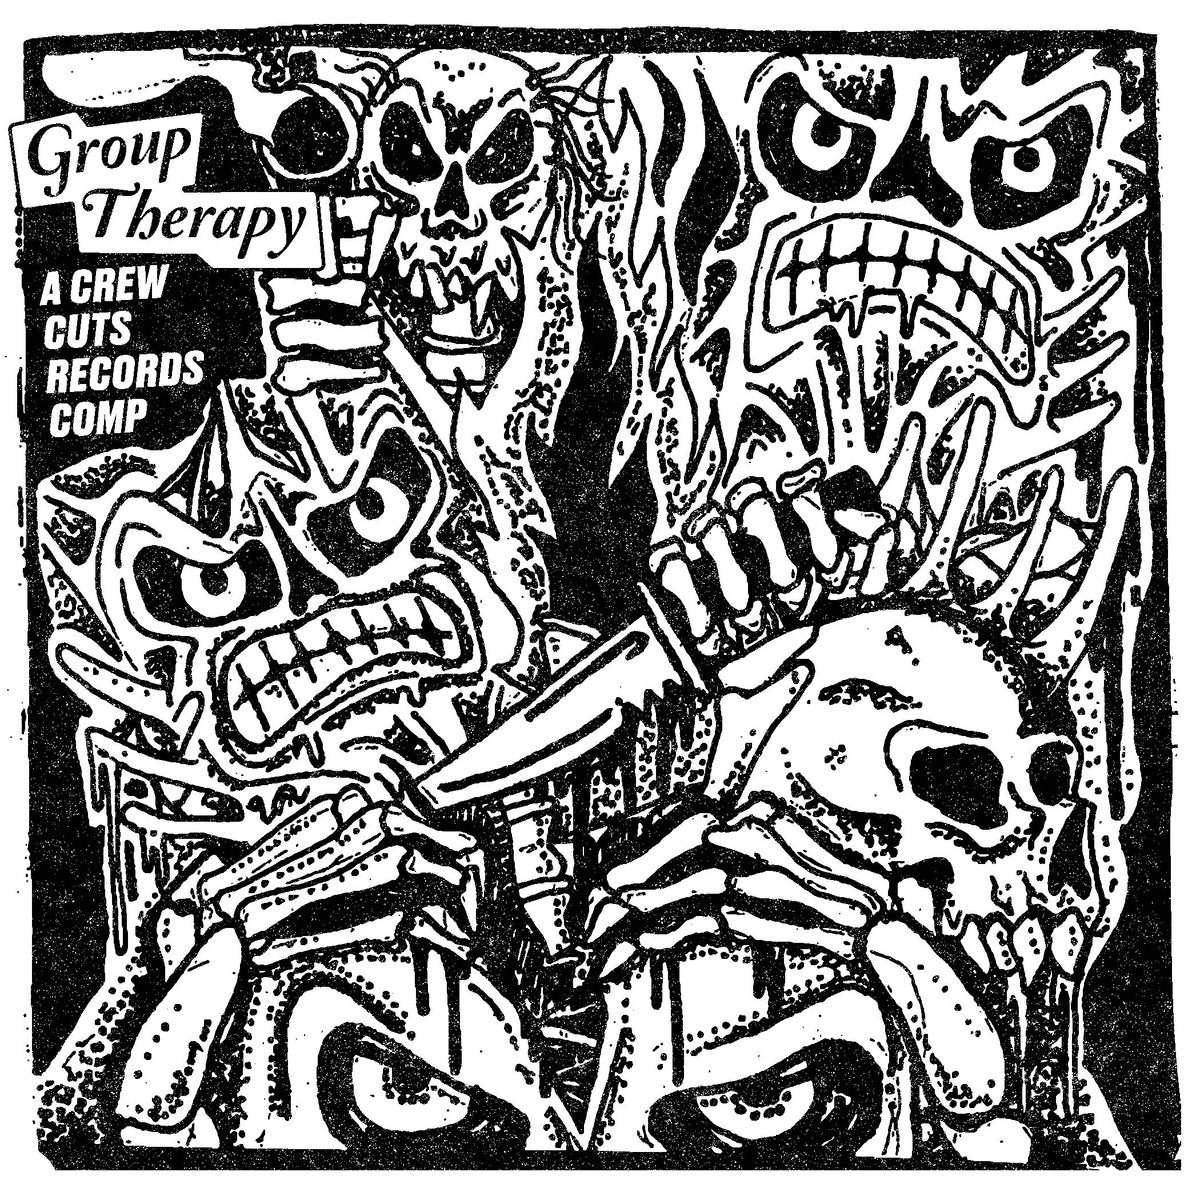 V/A 'GROUP THERAPY' 7"